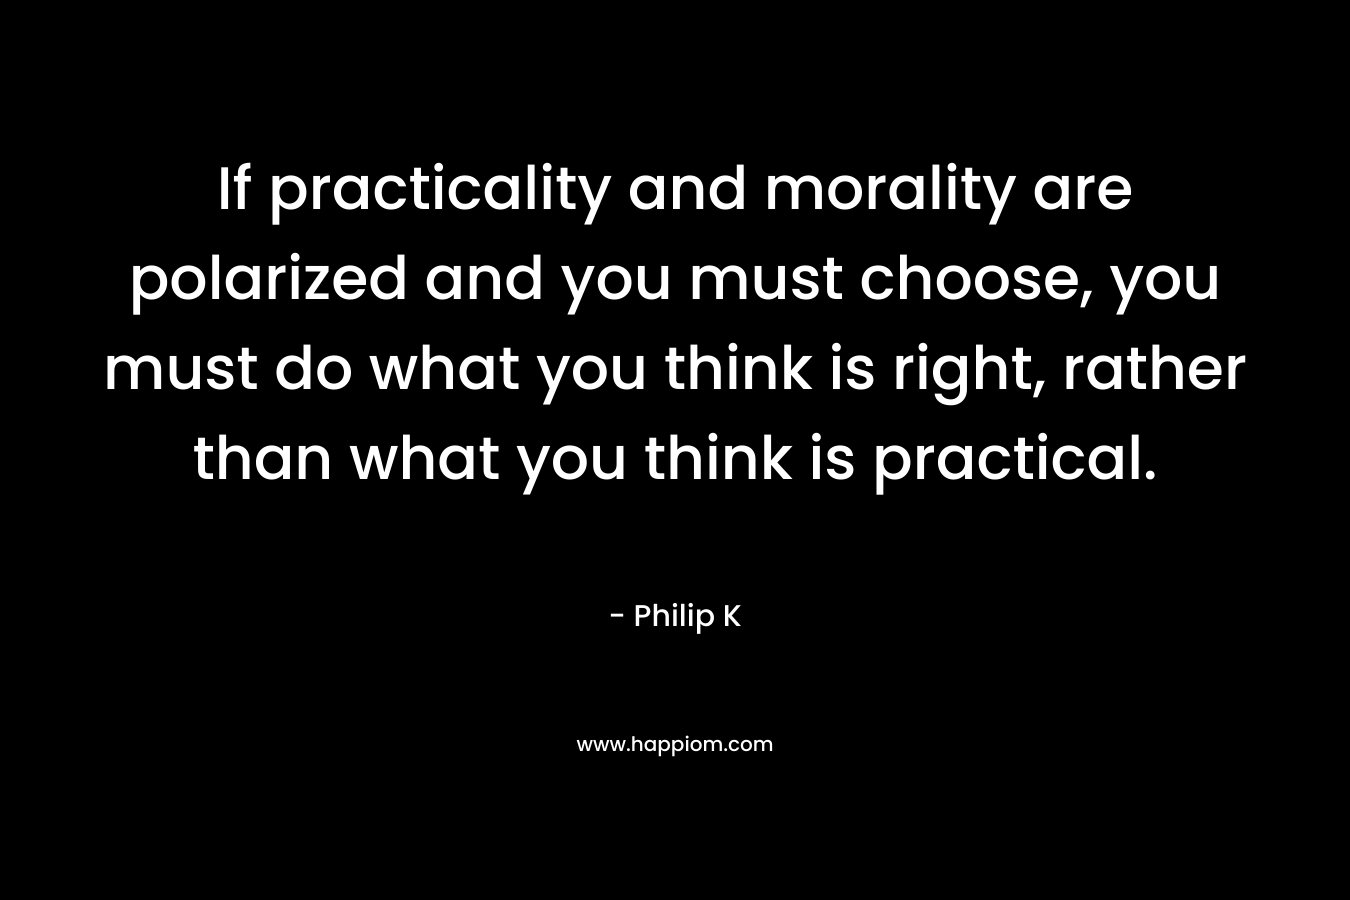 If practicality and morality are polarized and you must choose, you must do what you think is right, rather than what you think is practical.